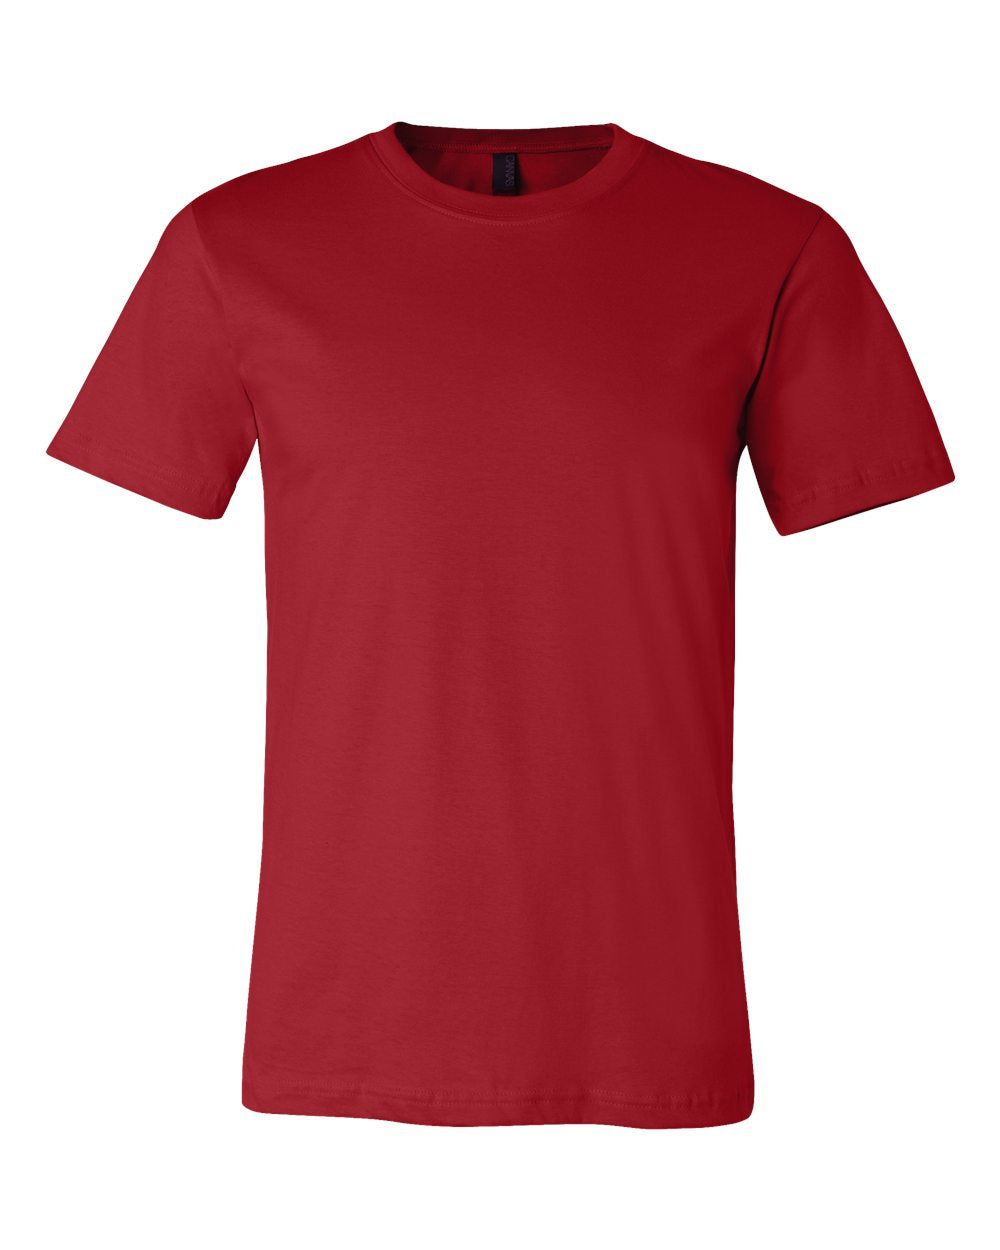 bella+canvas adult short sleeve tee canvas red